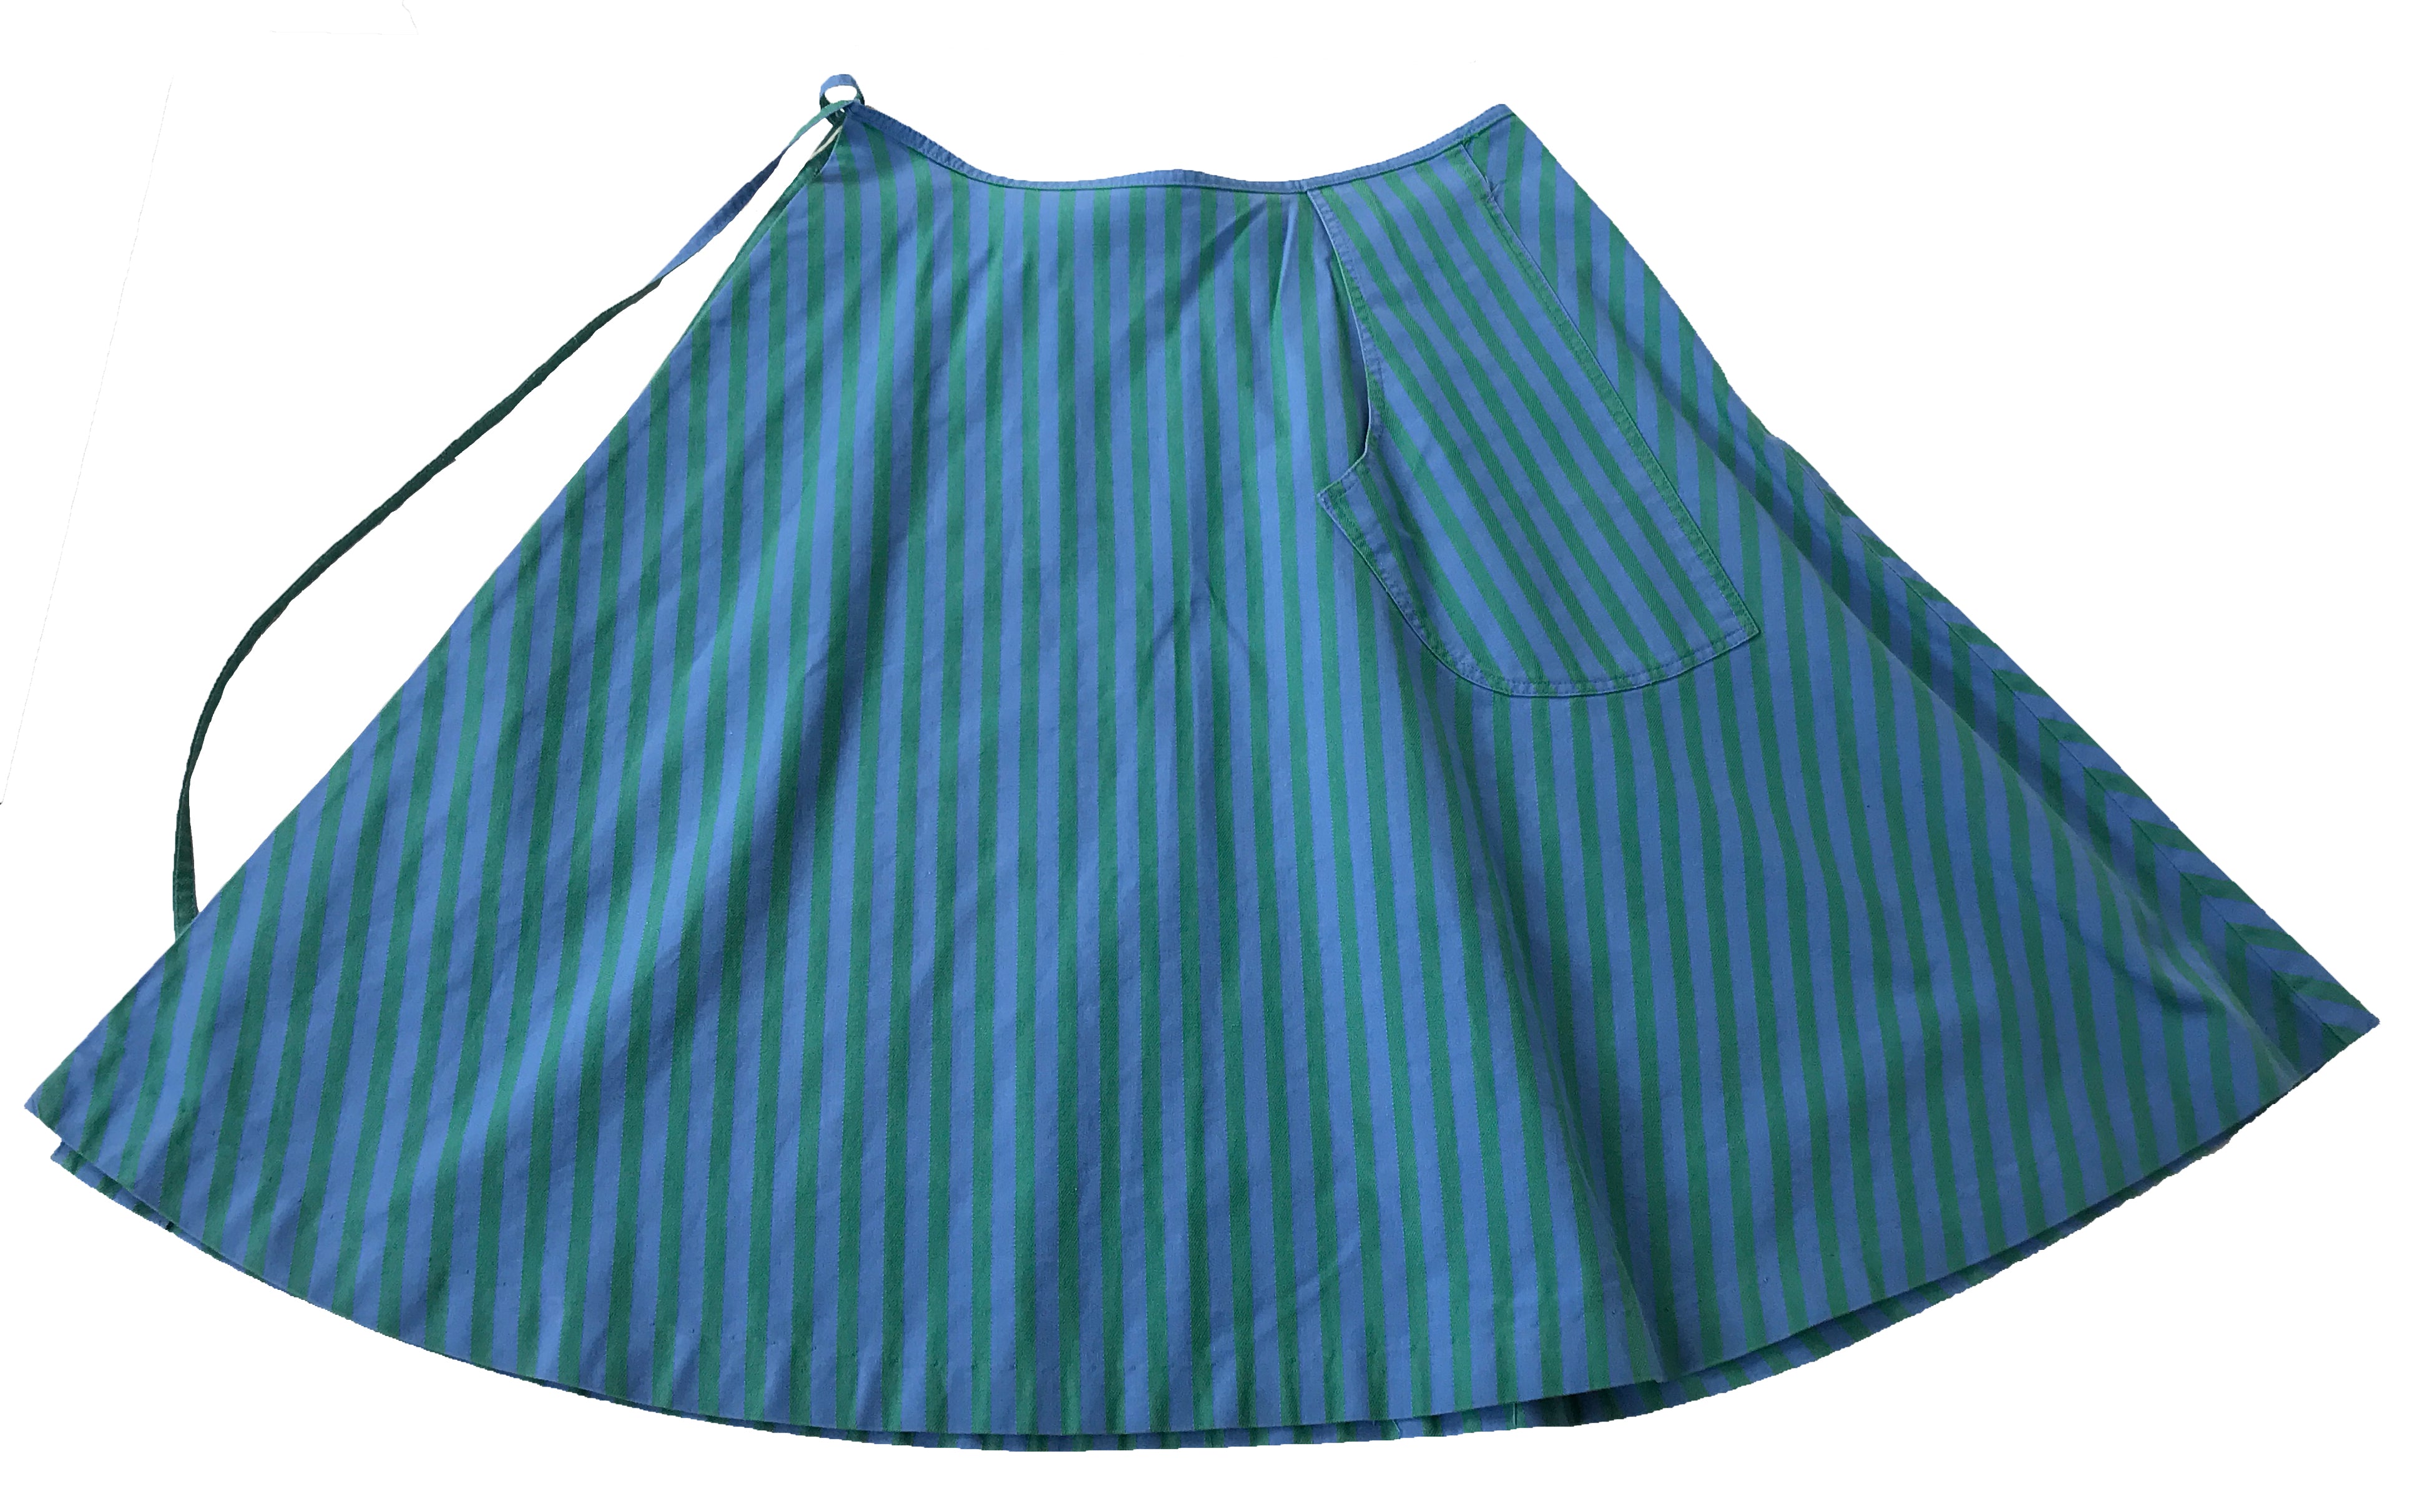 Vintage Blue and Green Wrap Skirt